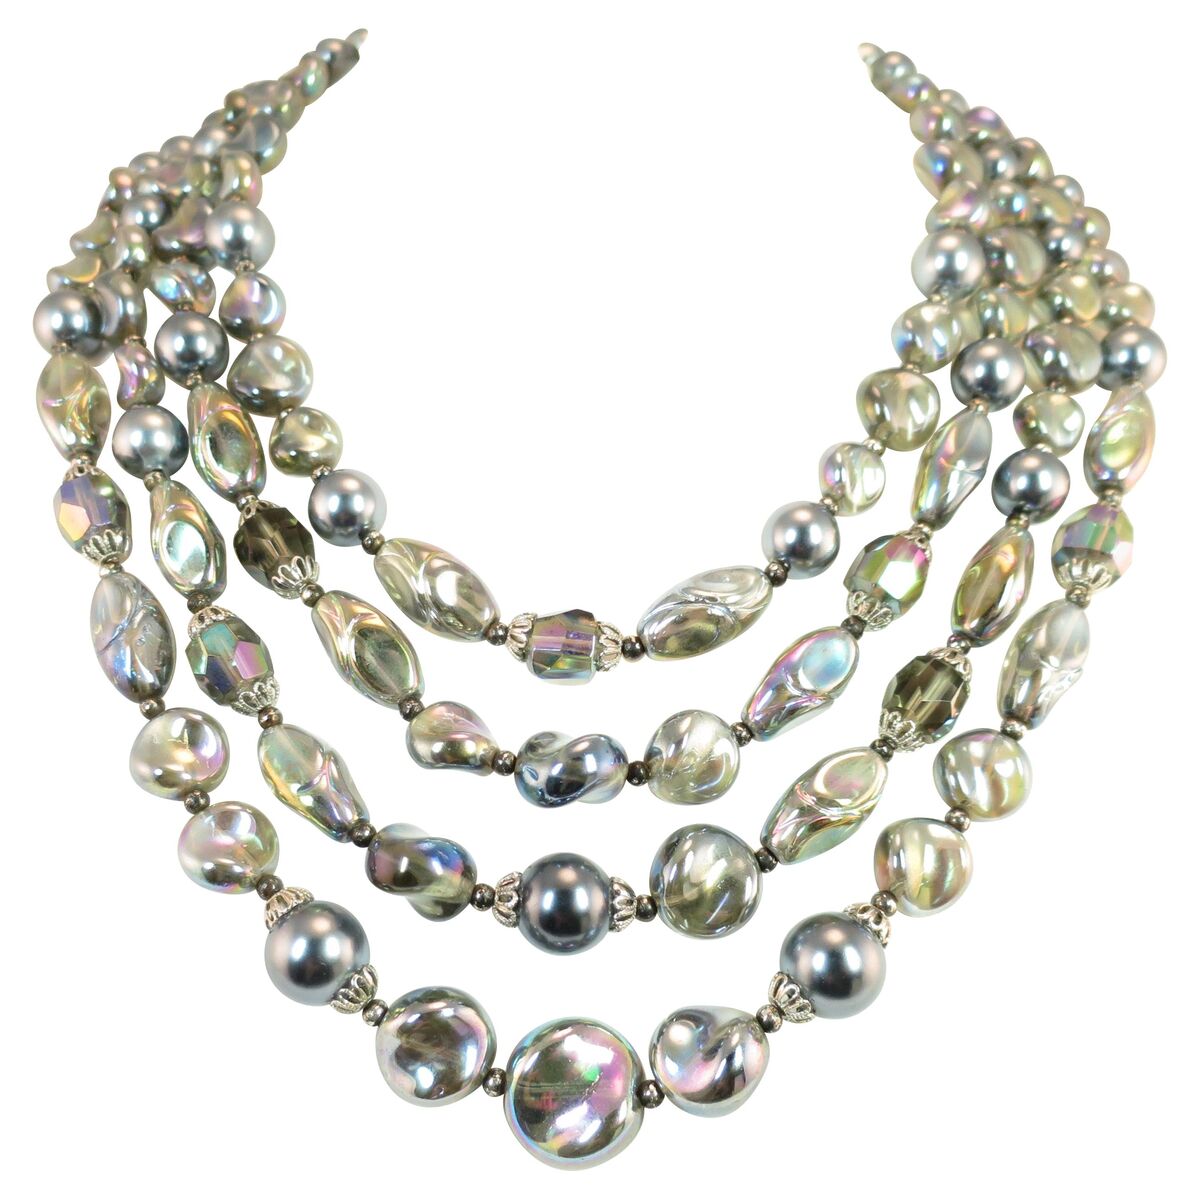 Alfred Philippe, a former designer for Cartier, came to the U.S. from Nazi Europe and became integral to the success of costume jeweler Trifari, serving as artistic director through 1968. This Trifari necklace is from the 1960s.
